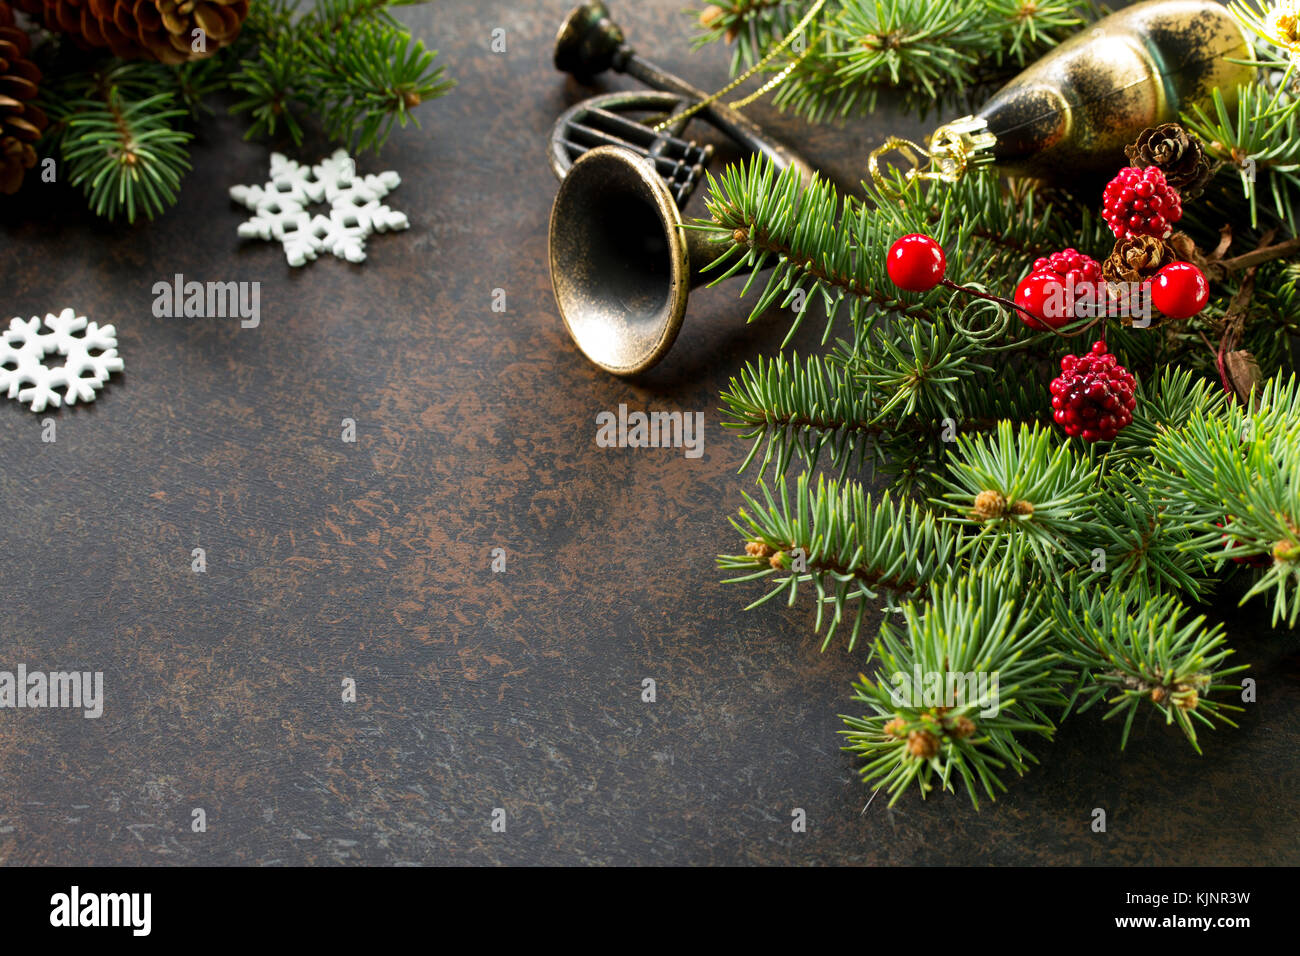 Christmas background frame or greeting xmas card. Christmas tree and decorative ornaments on a dark stone and slate background. Flat lay, top view wit Stock Photo